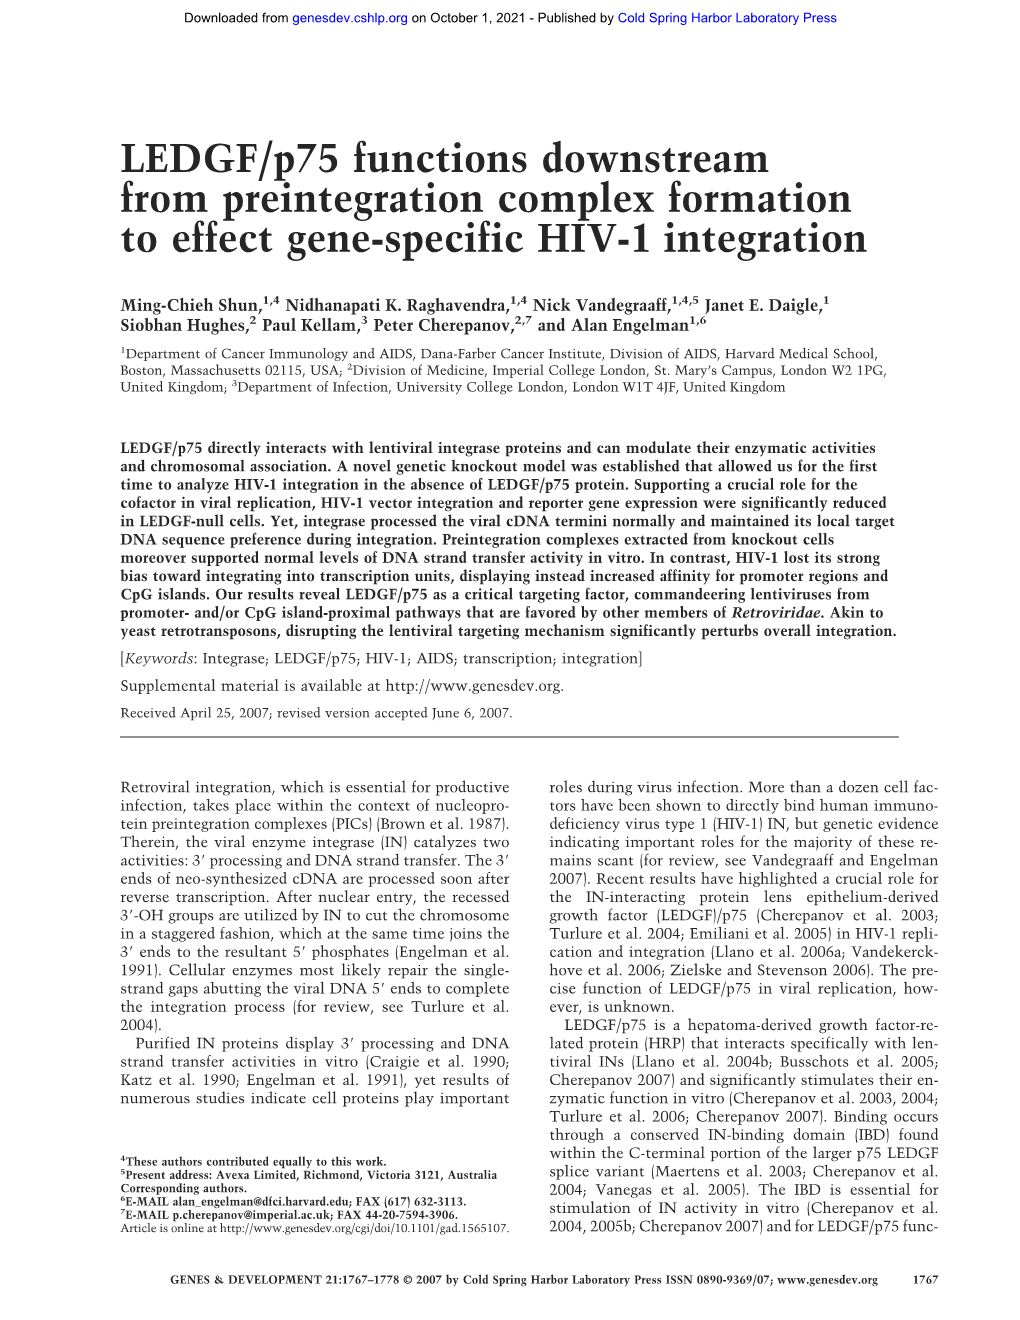 LEDGF/P75 Functions Downstream from Preintegration Complex Formation to Effect Gene-Specific HIV-1 Integration